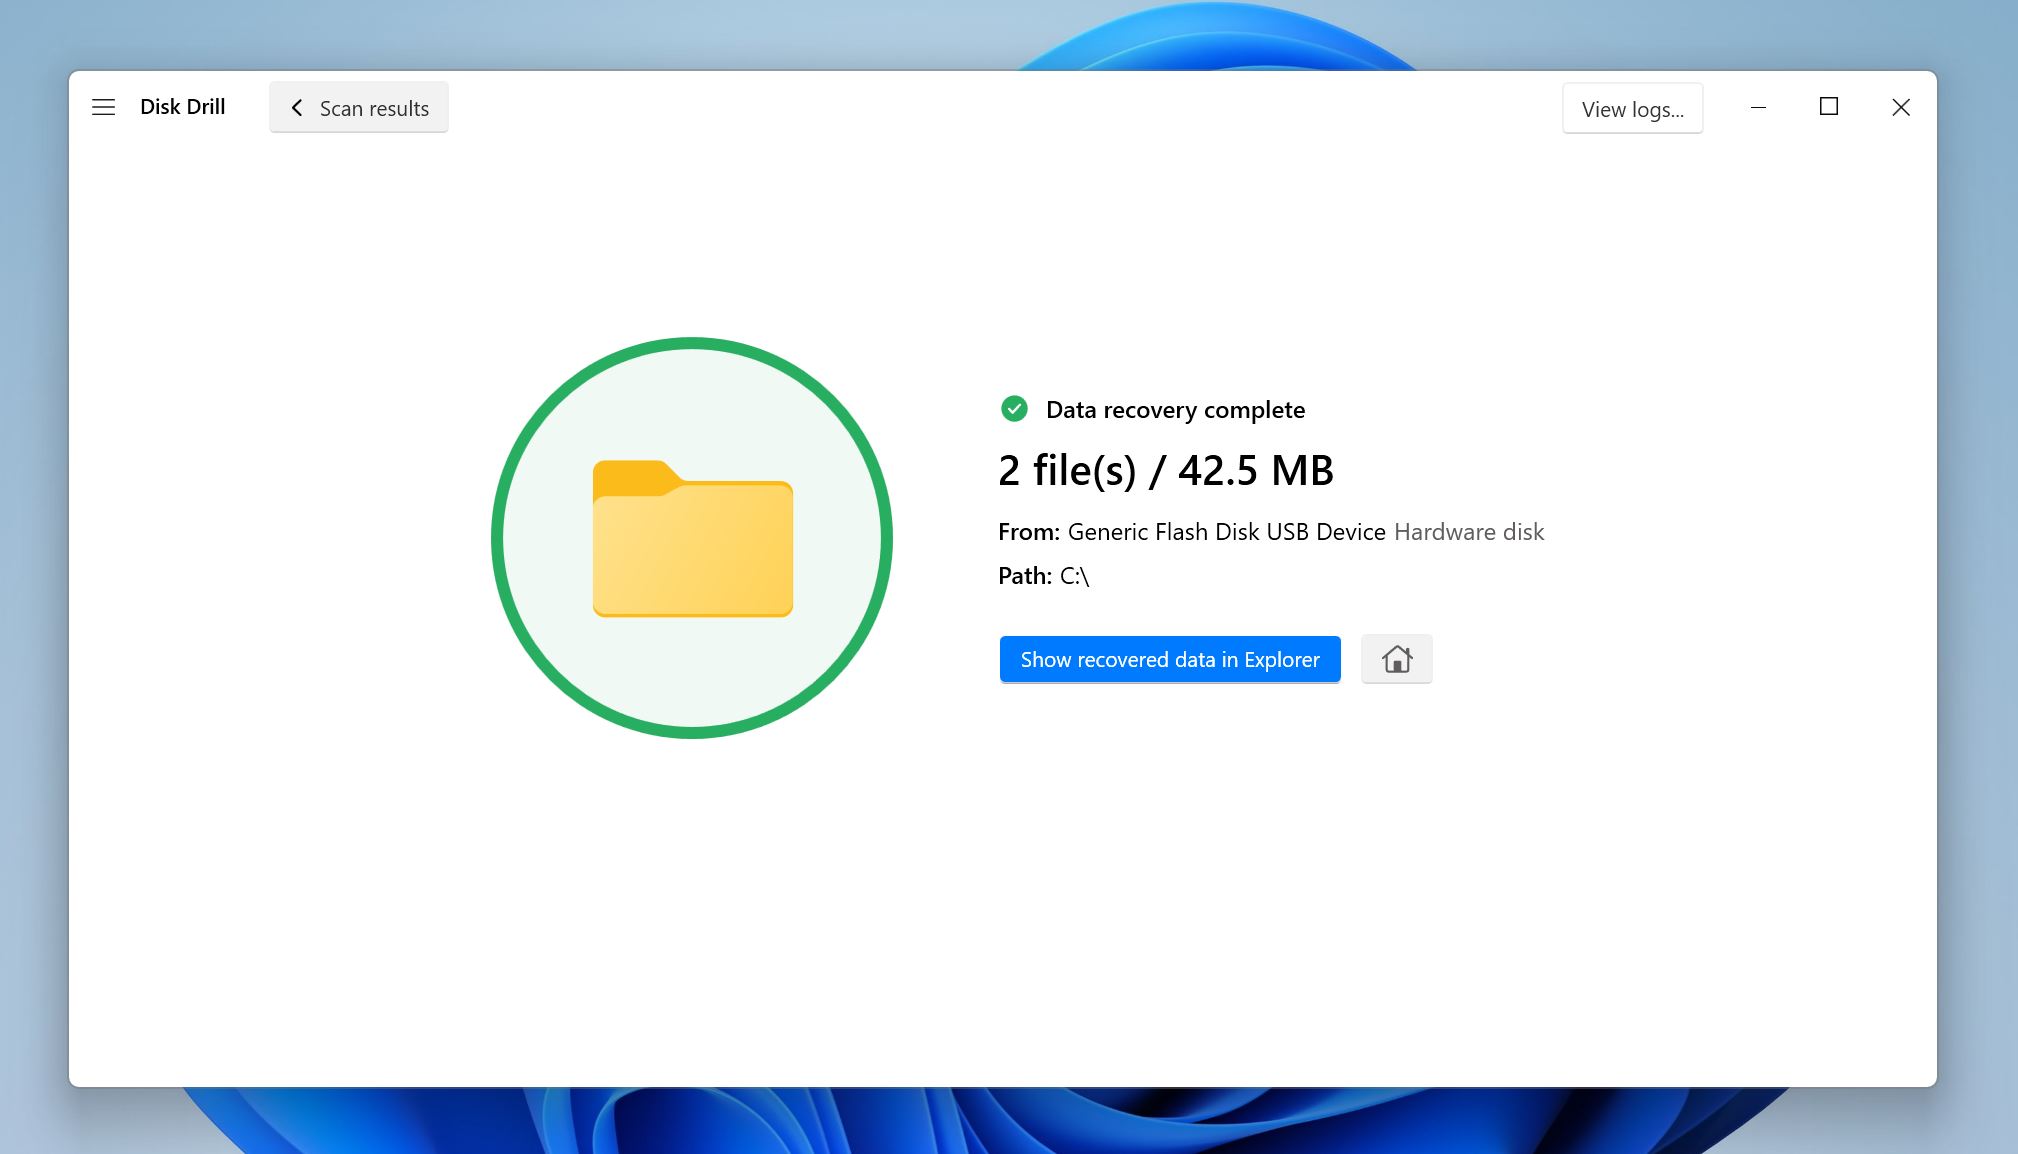 Disk Drill data recovery software showing a complete recovery of 2 files totaling 42.5 MB from a generic flash disk.